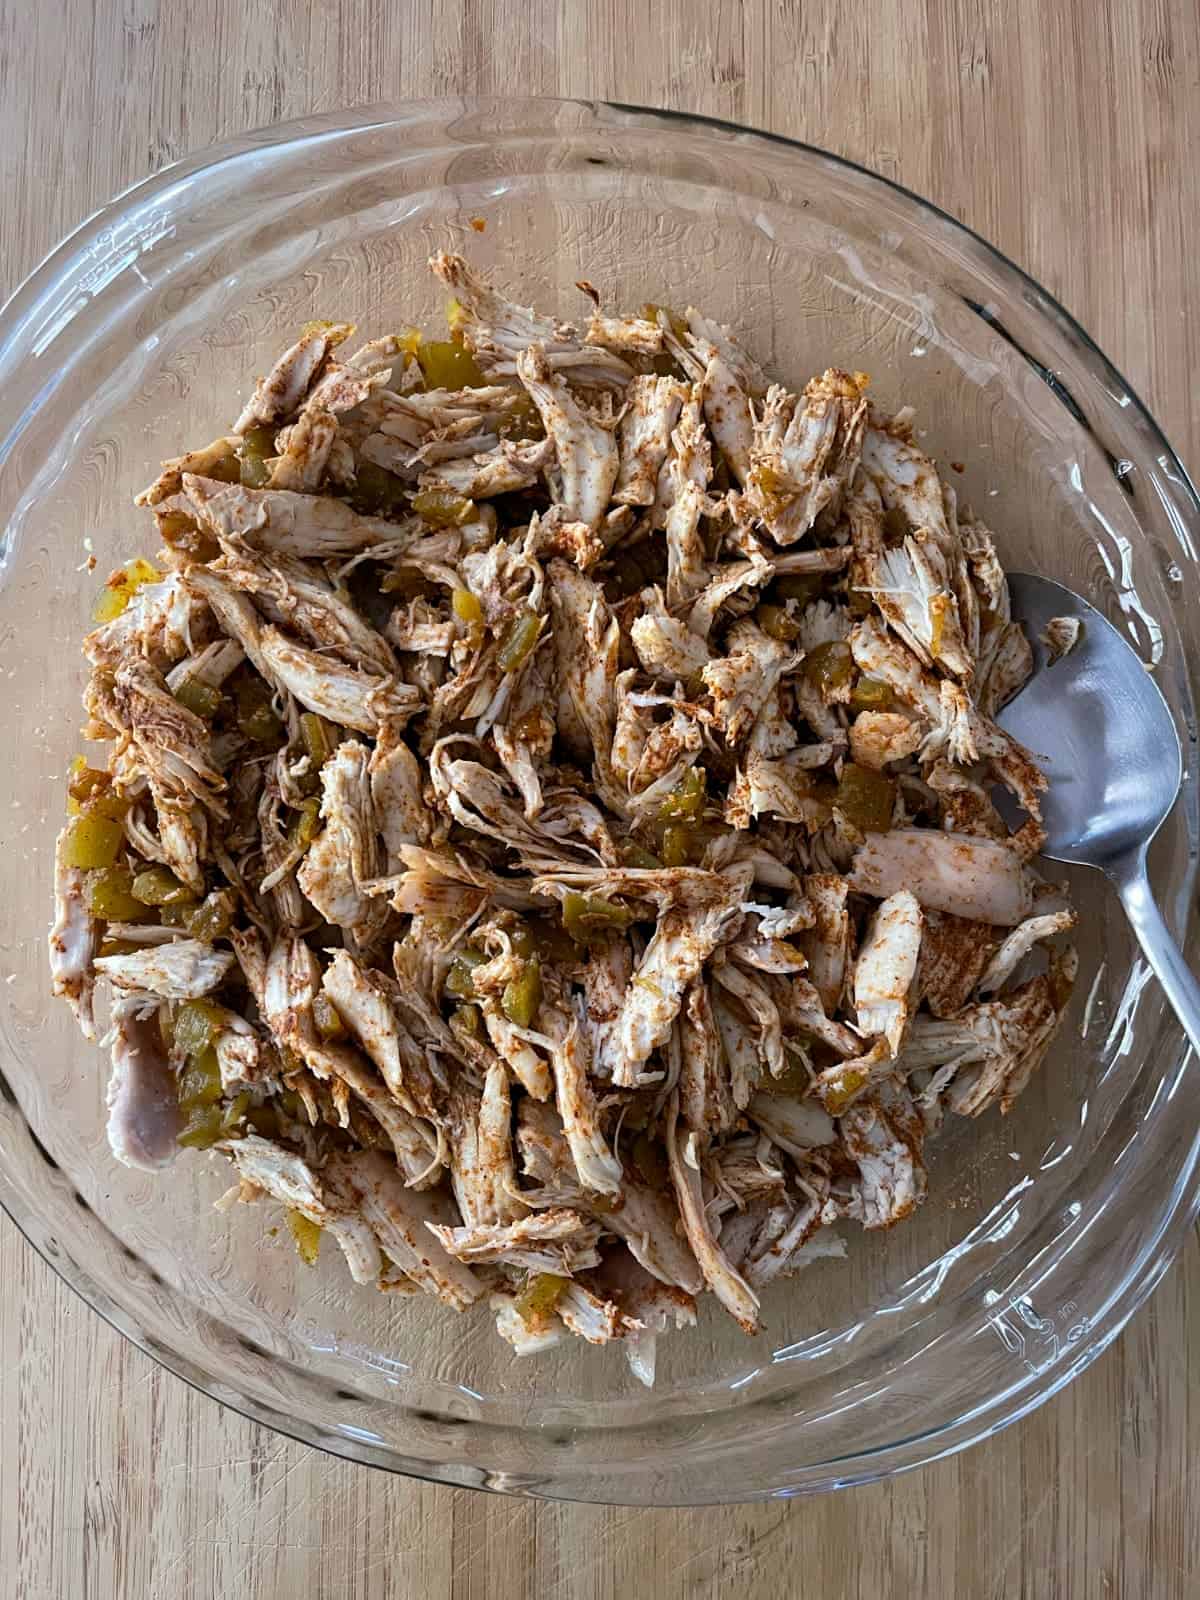 Mixing shredded chicken, chopped green chiles and taco seasoning in glass pie dish.